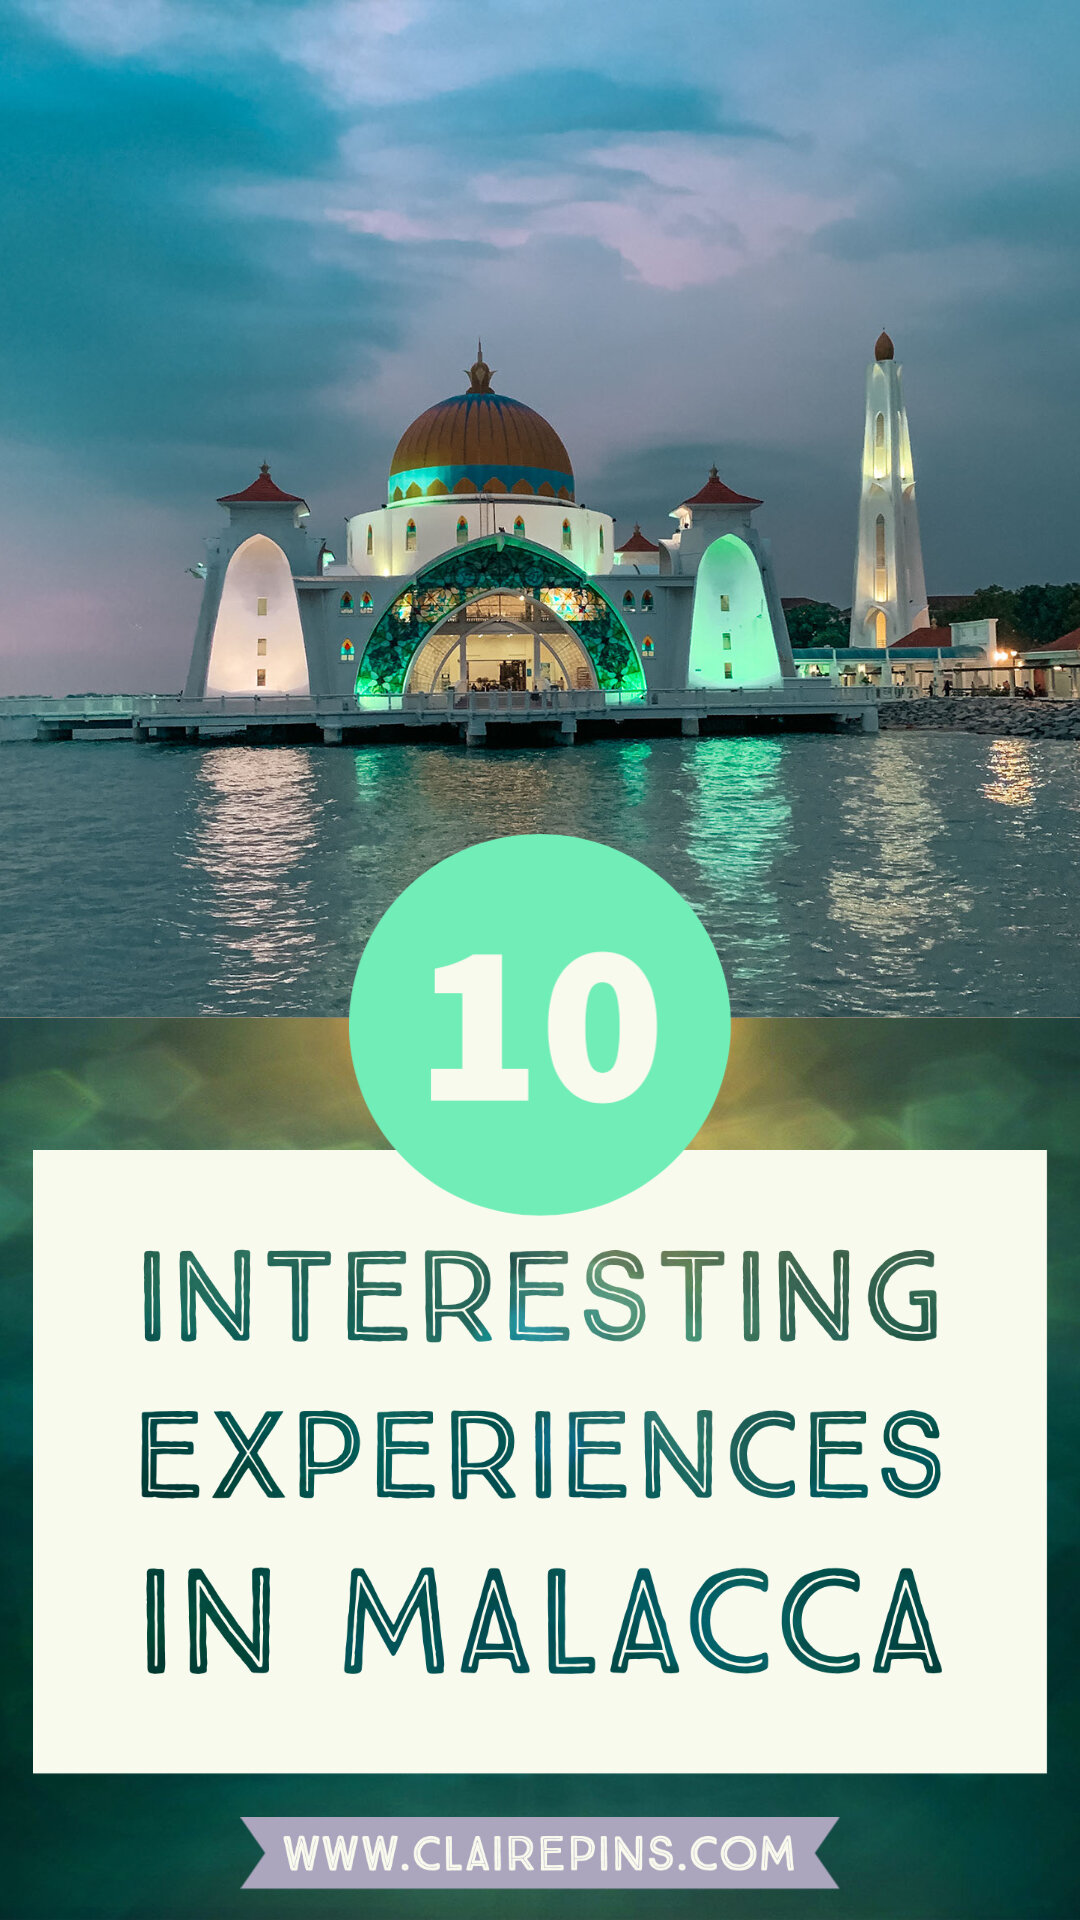 10 Interesting experiences in Malacca, Malaysia, illustrated by the Melaka Straits Mosque.jpg